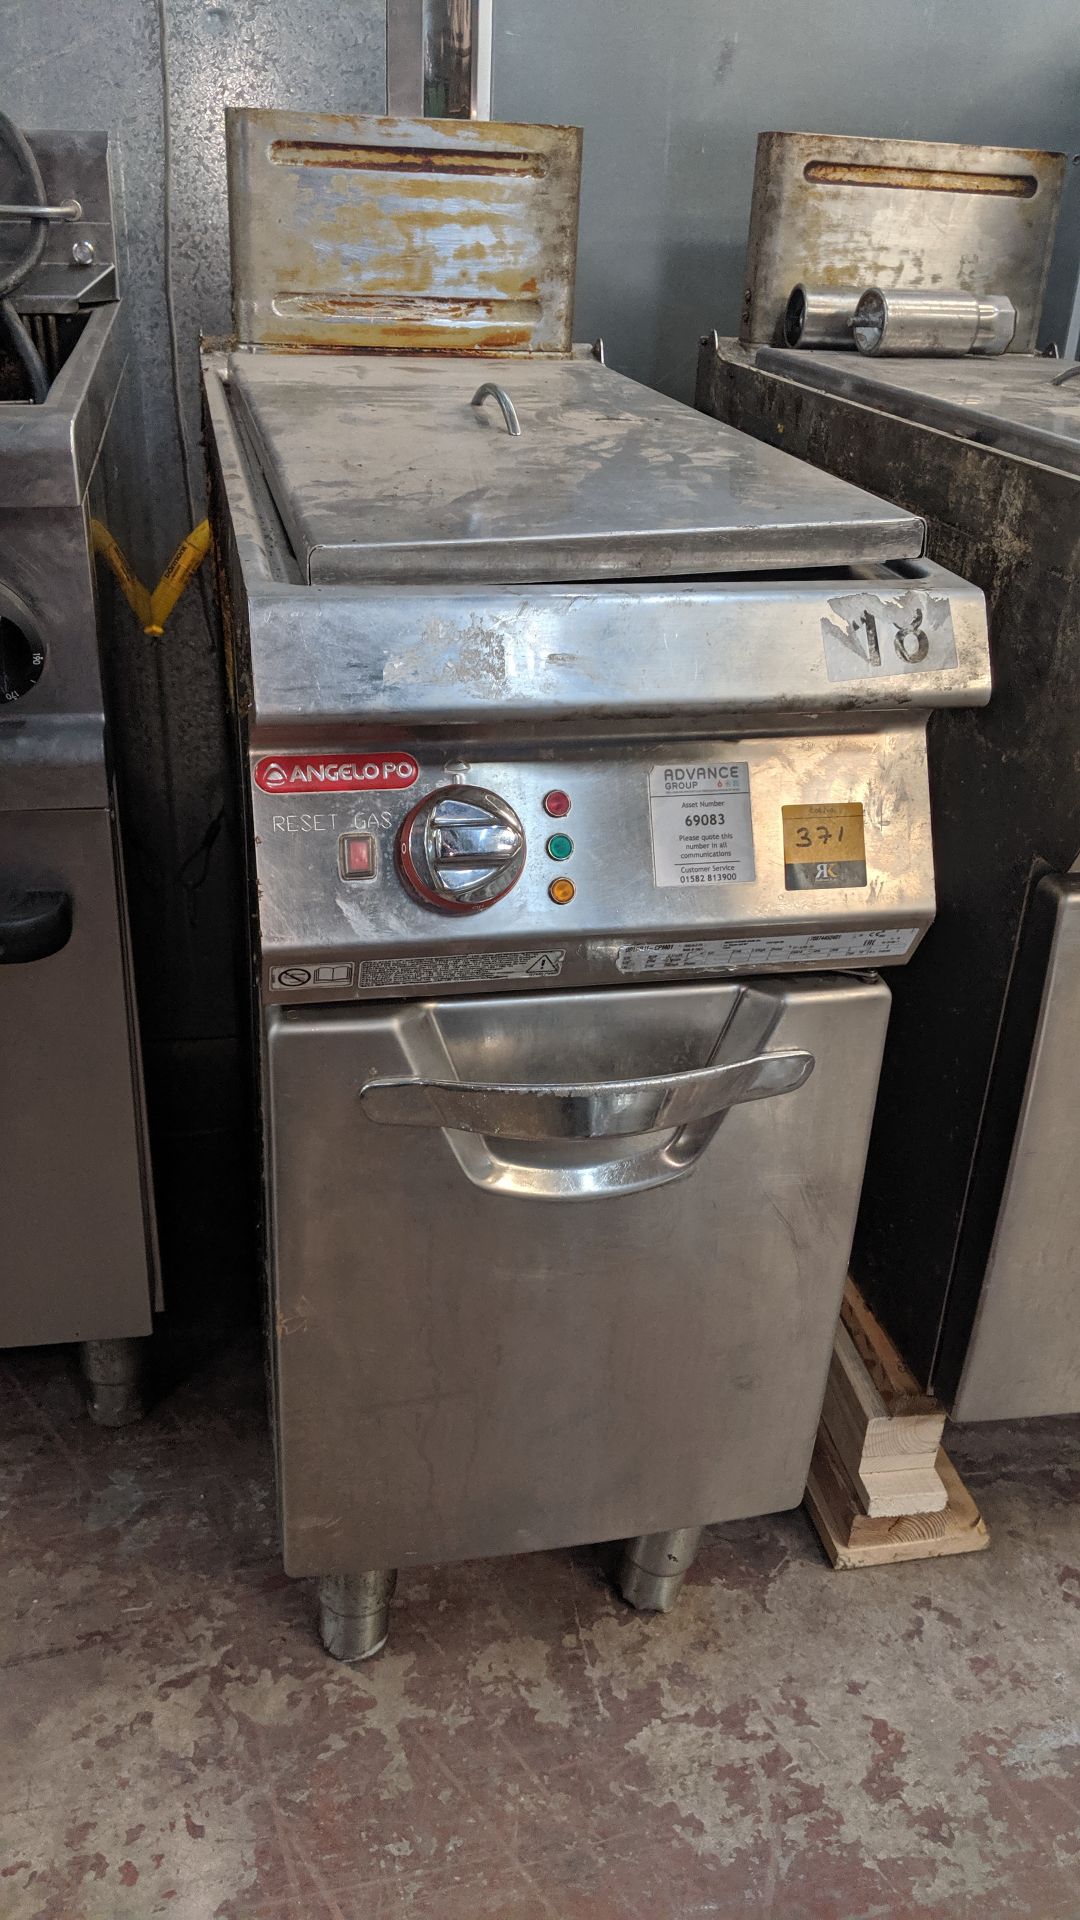 Angelo Po large/deep fryer model 091FR1L IMPORTANT: Please remember goods successfully bid upon must - Image 4 of 6